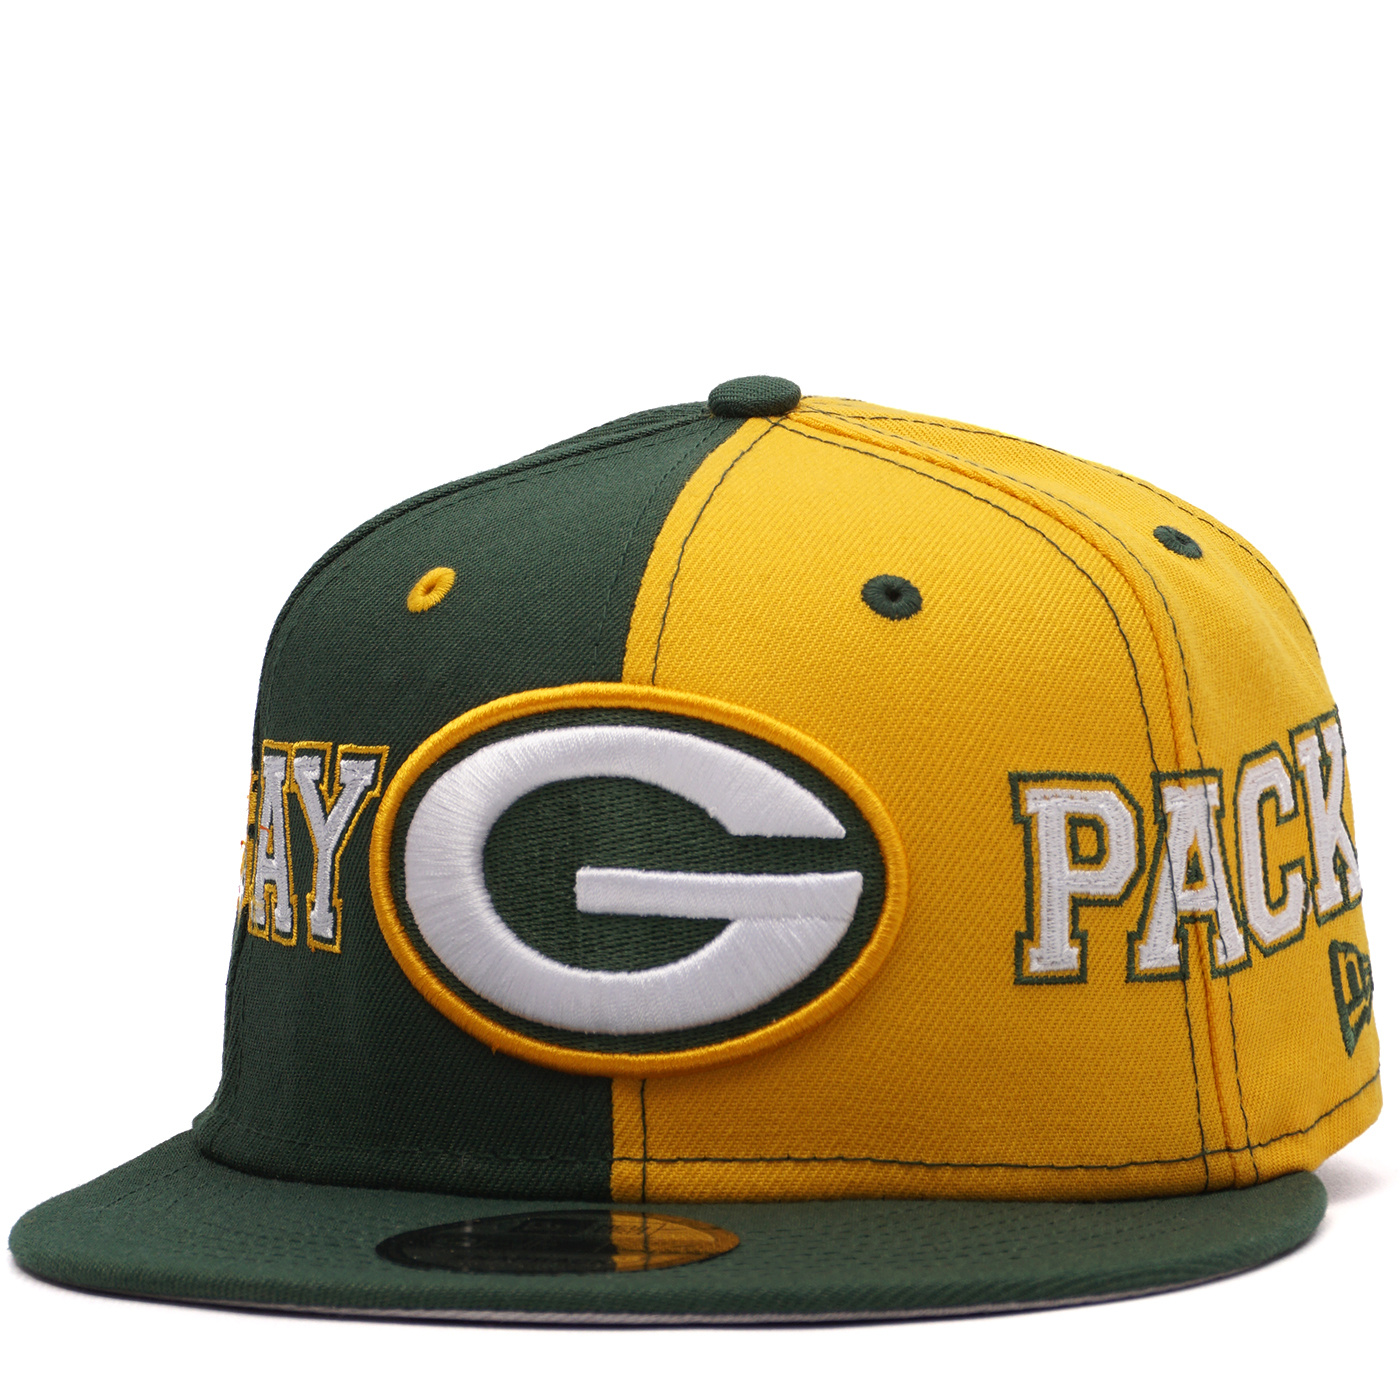 Golden State Warriors New Era The Town 9FIFTY Snapback - Green/Gold